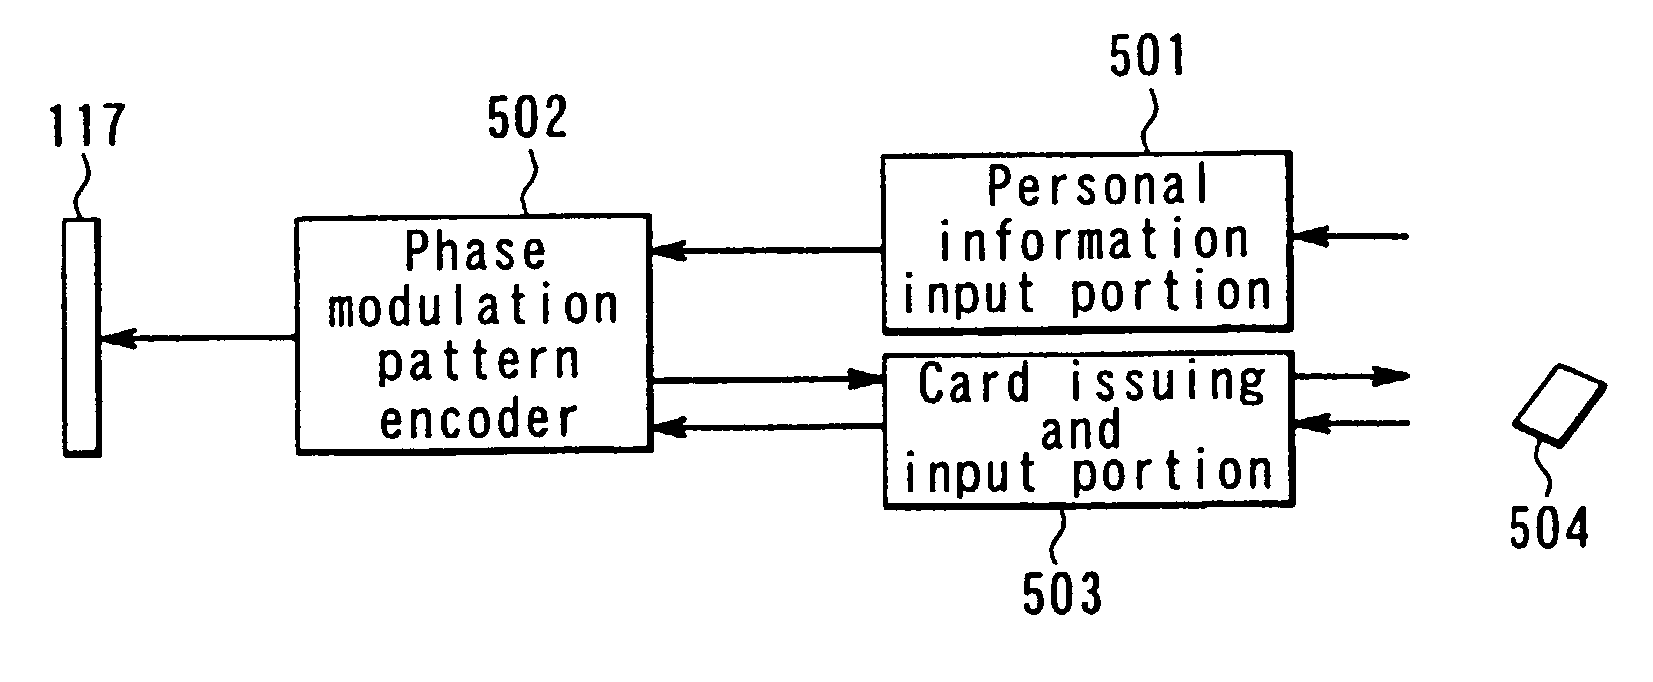 Apparatus for recording optical information